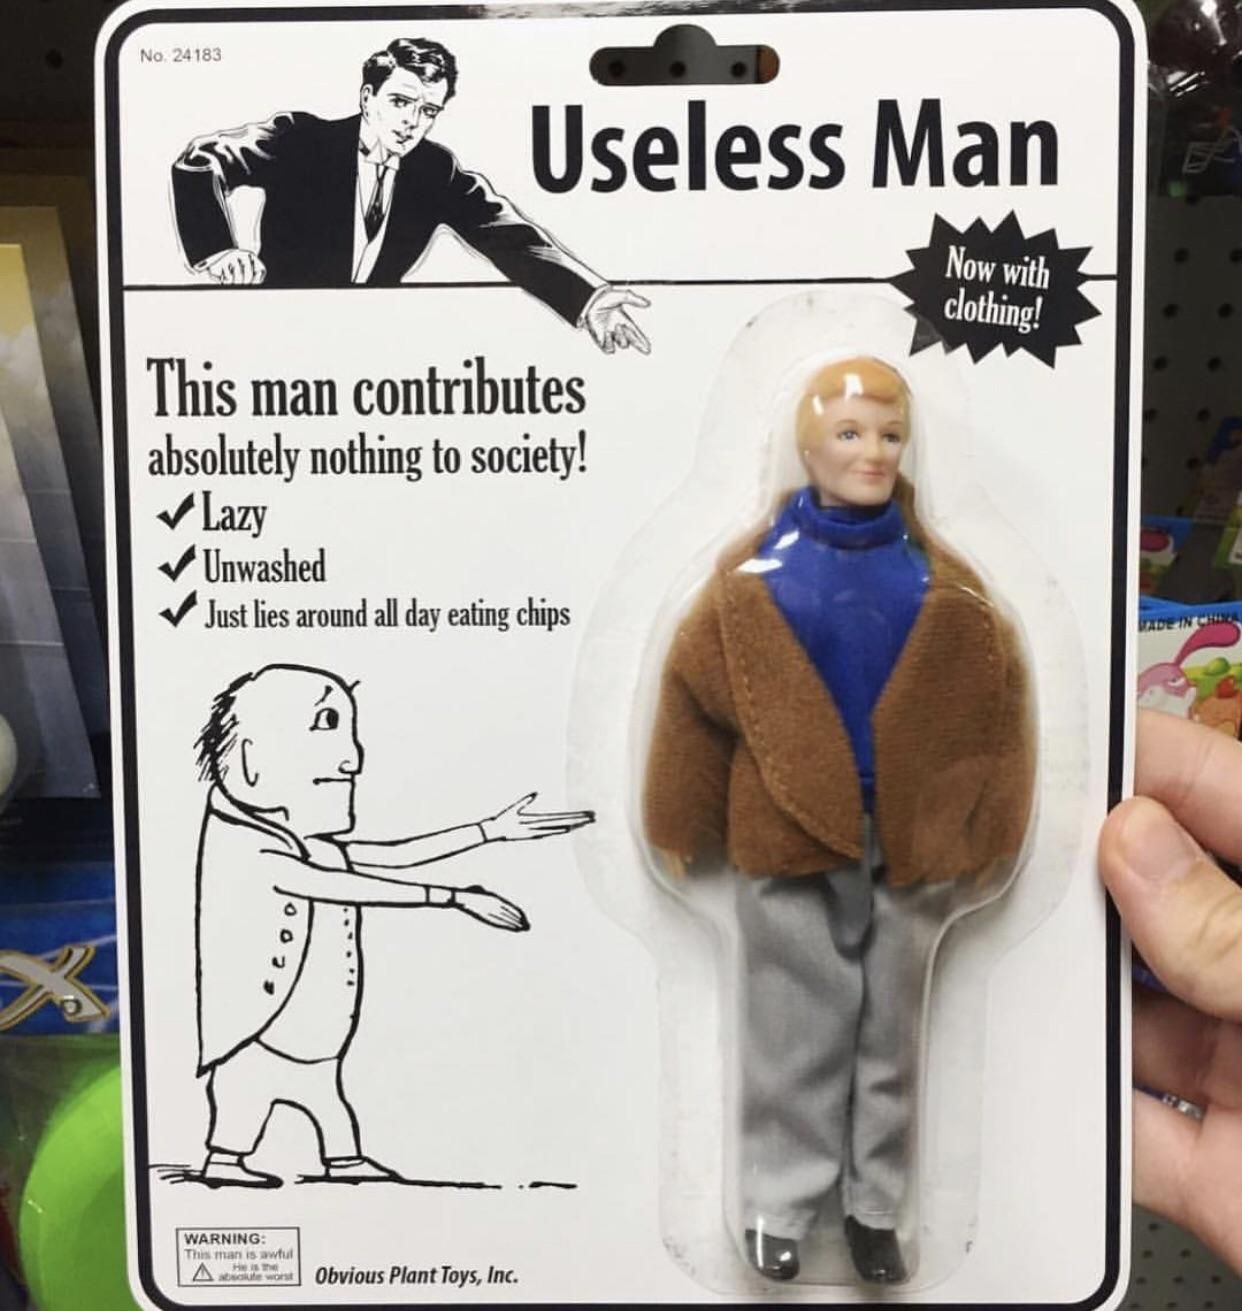 They finally created an action figure i can look up to